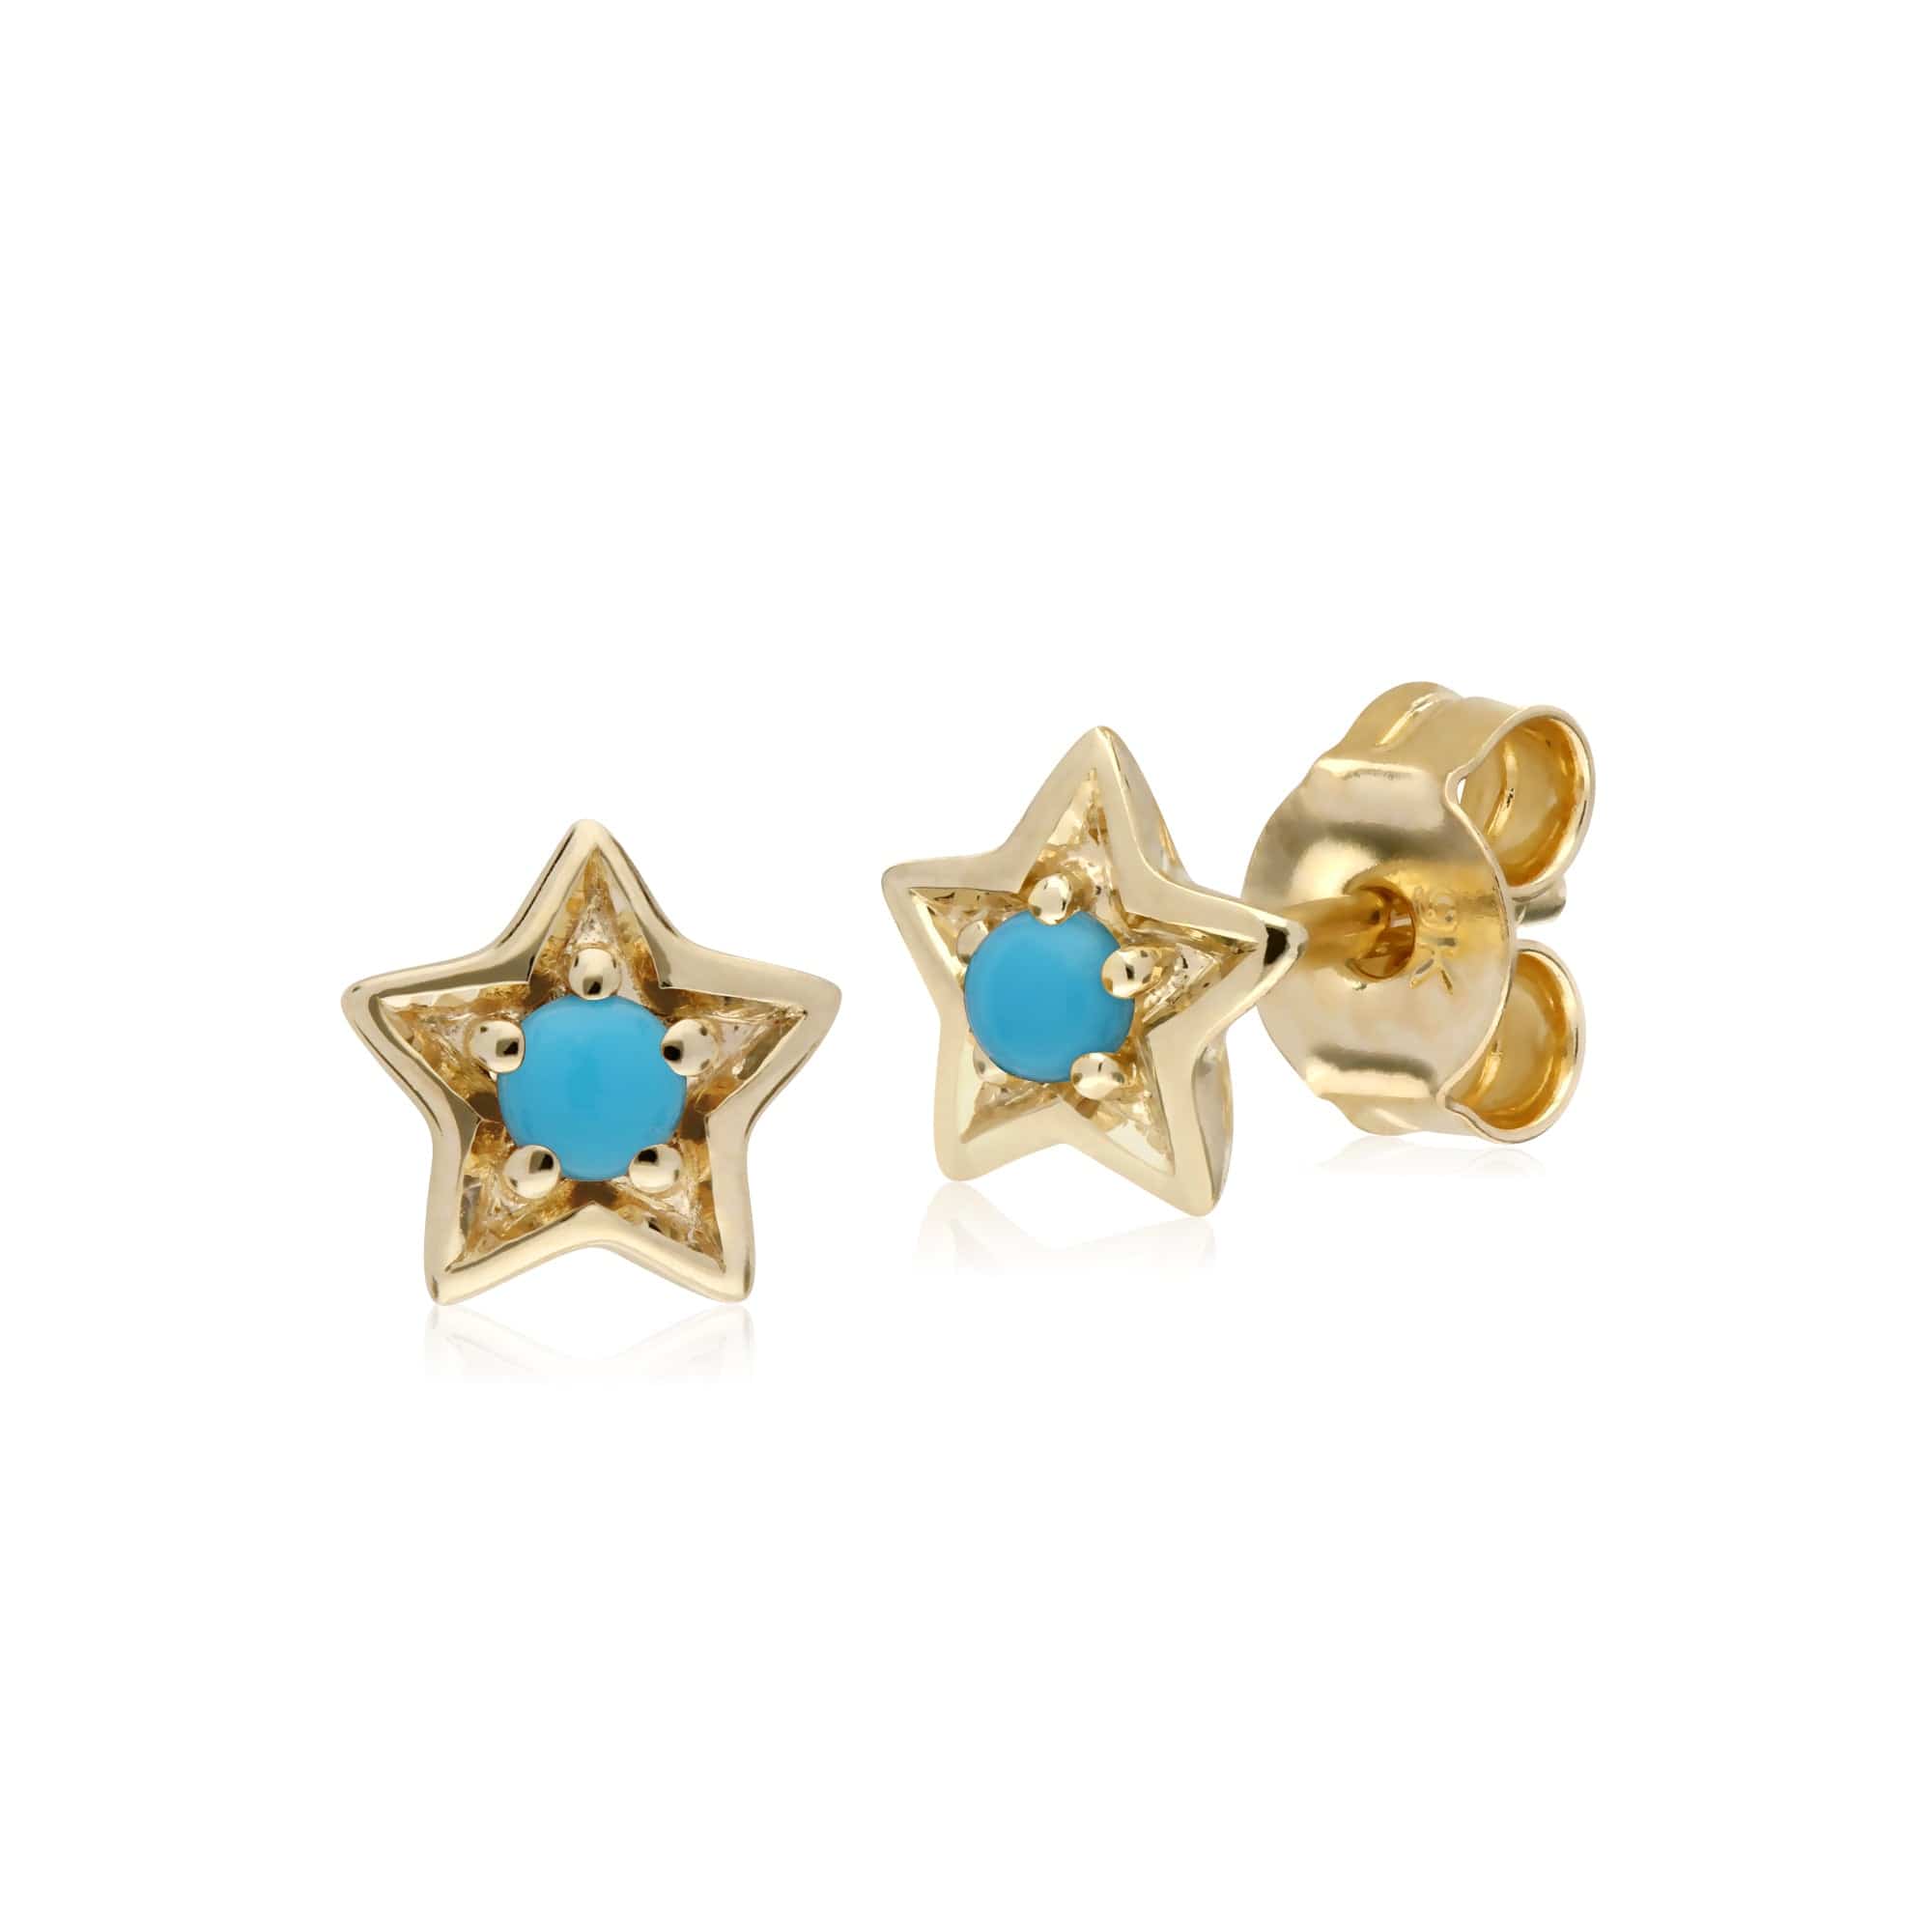 135E1565019-135P1903019 Contemporary Round Turquoise Single Stone Star Earrings & Necklace Set in 9ct Yellow Gold 2